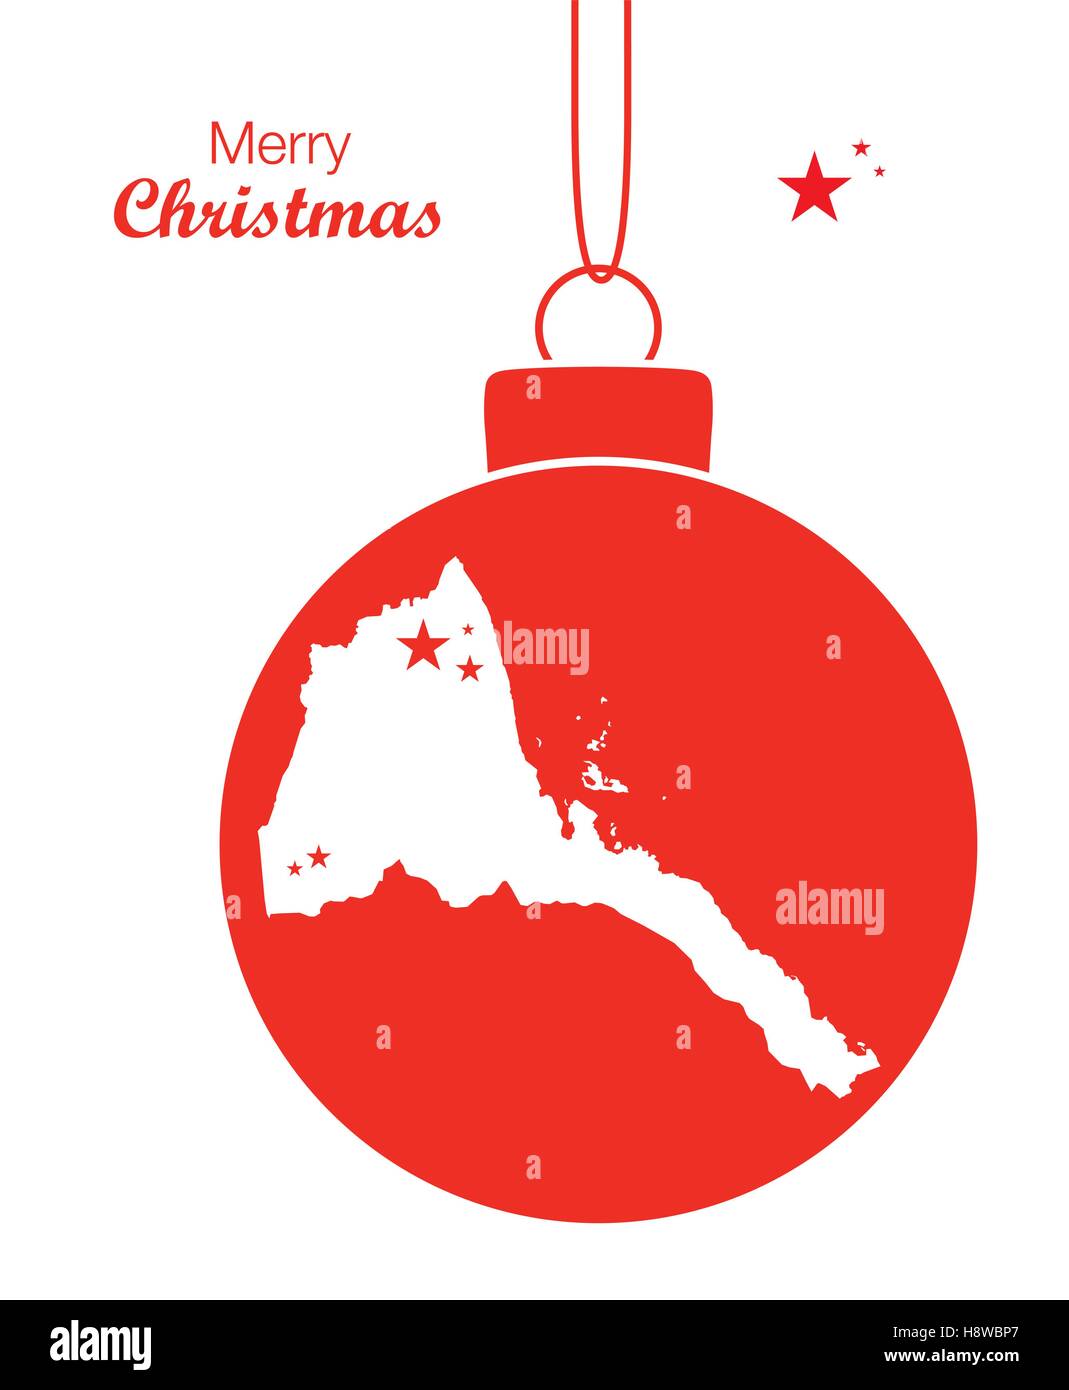 Merry Christmas illustration theme with map of Eritrea Stock Vector